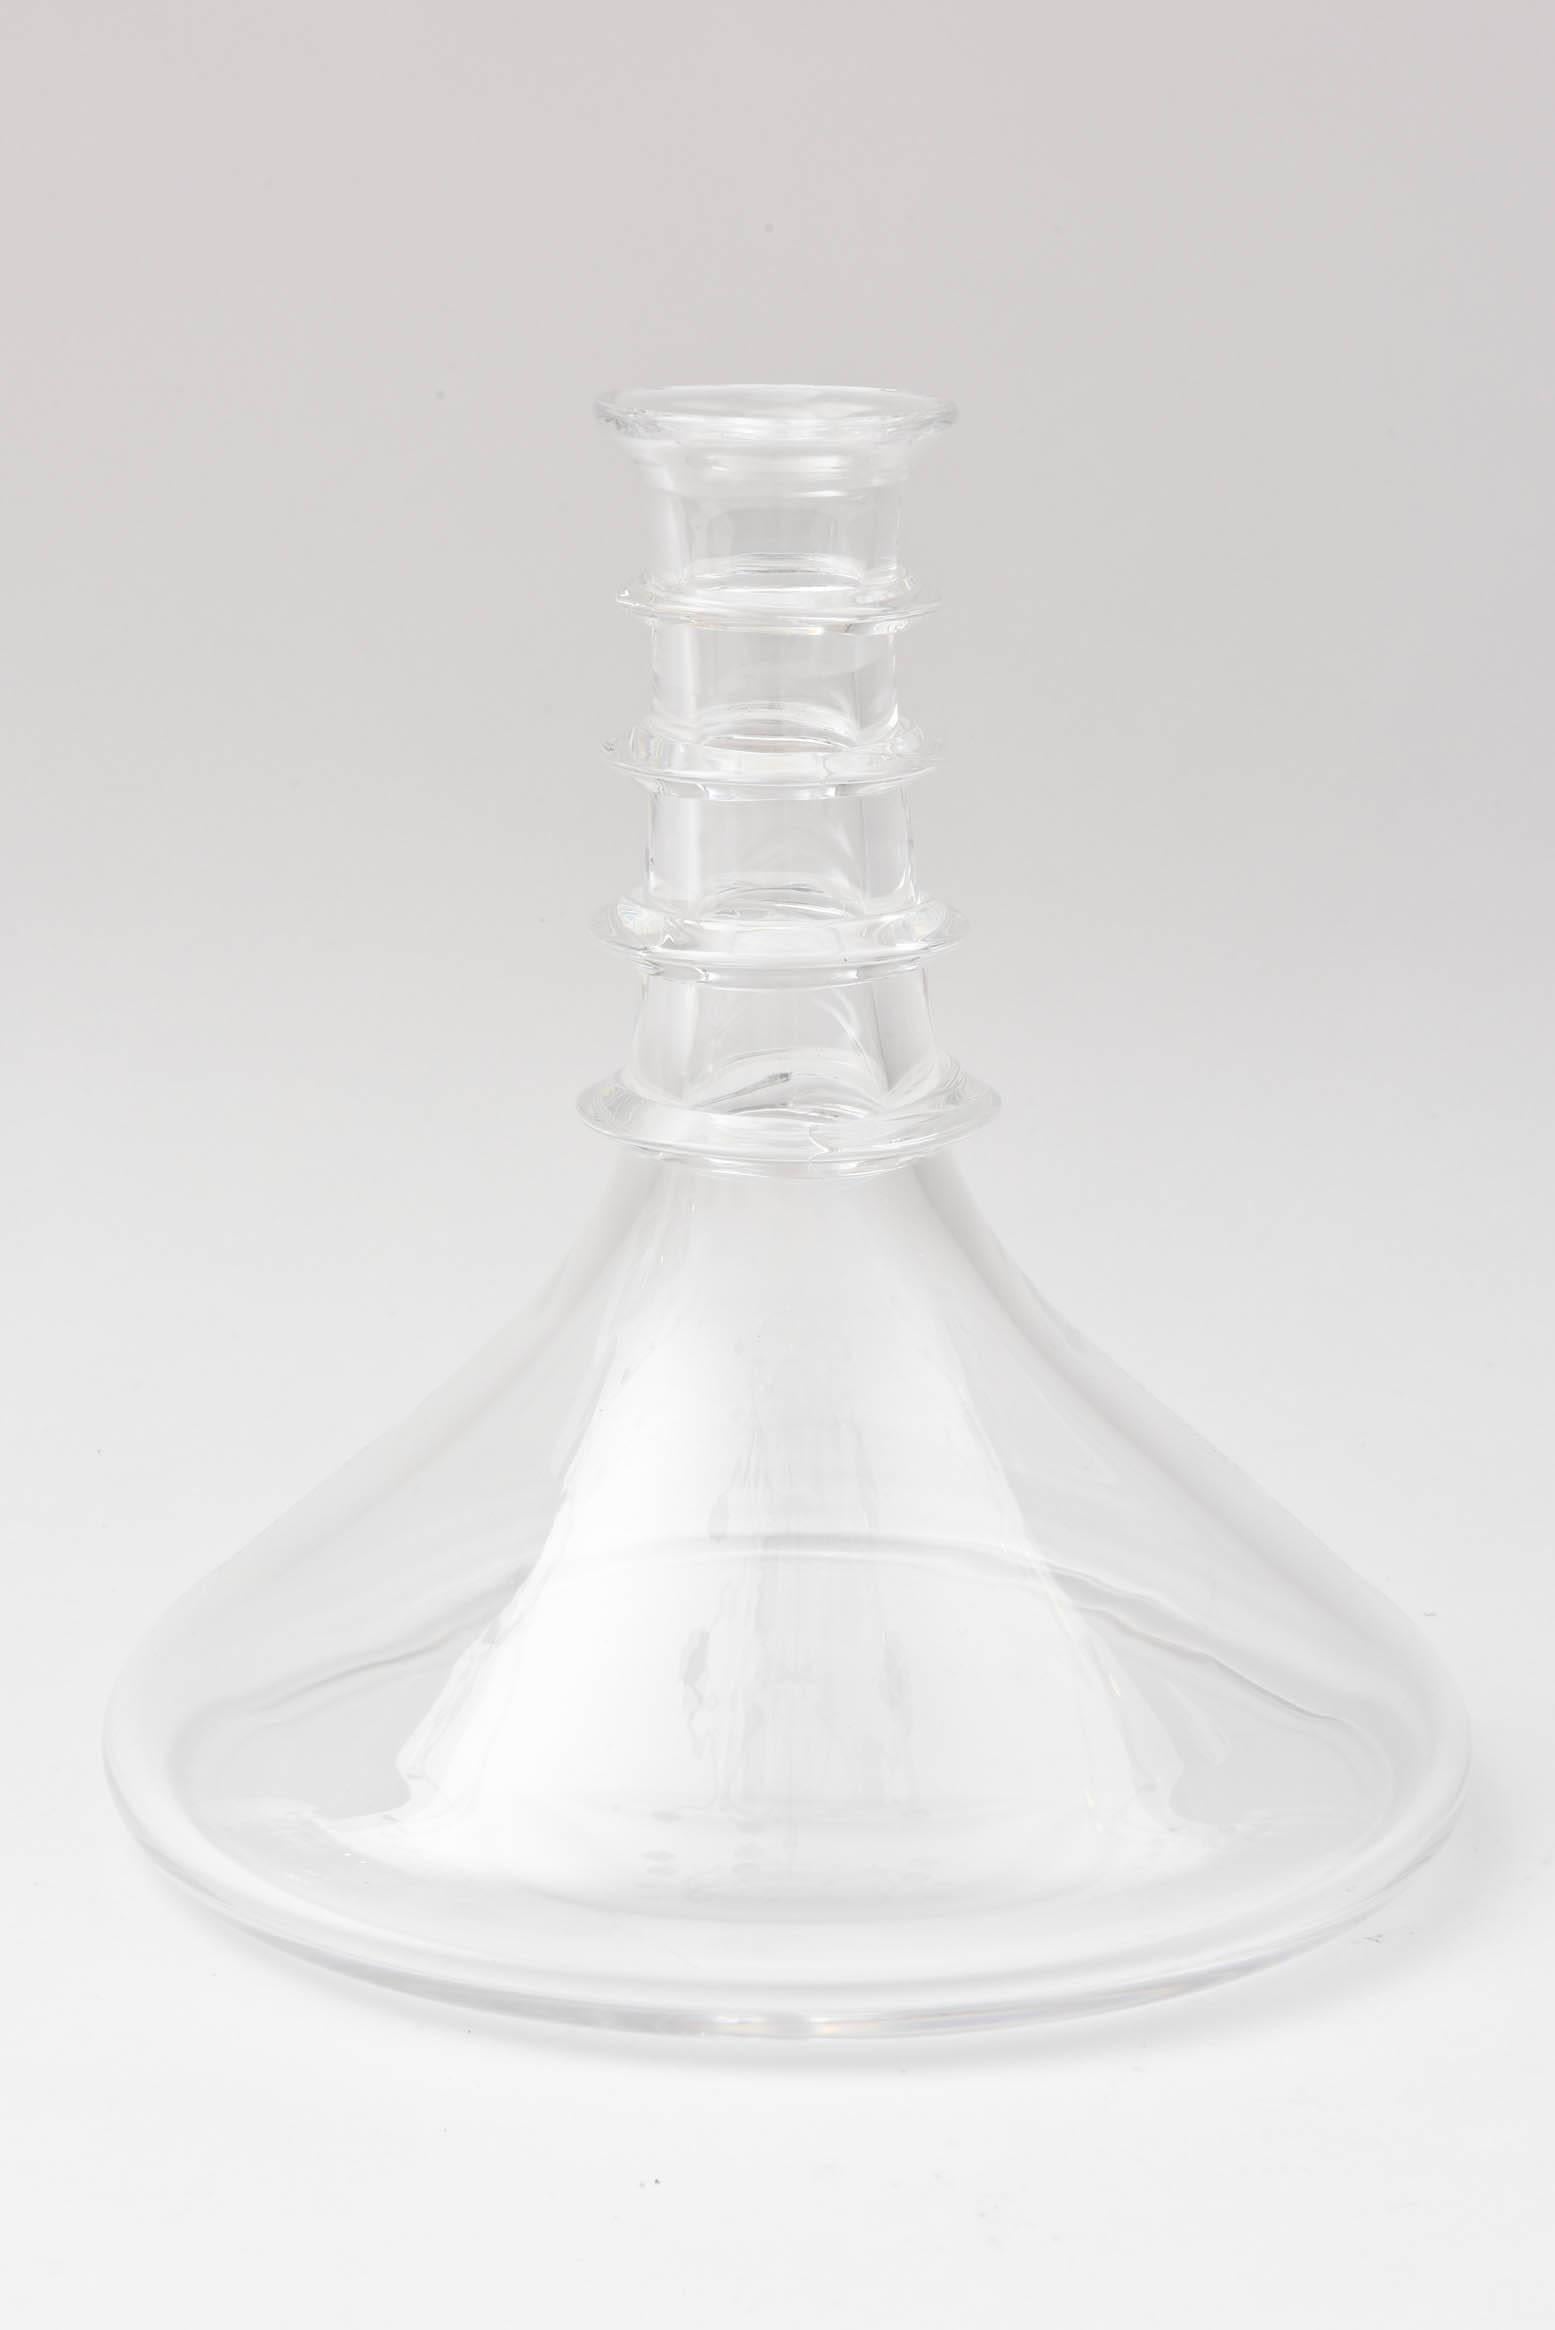 Hand-Crafted Steuben Captain's Decanter, Vintage Blown Crystal